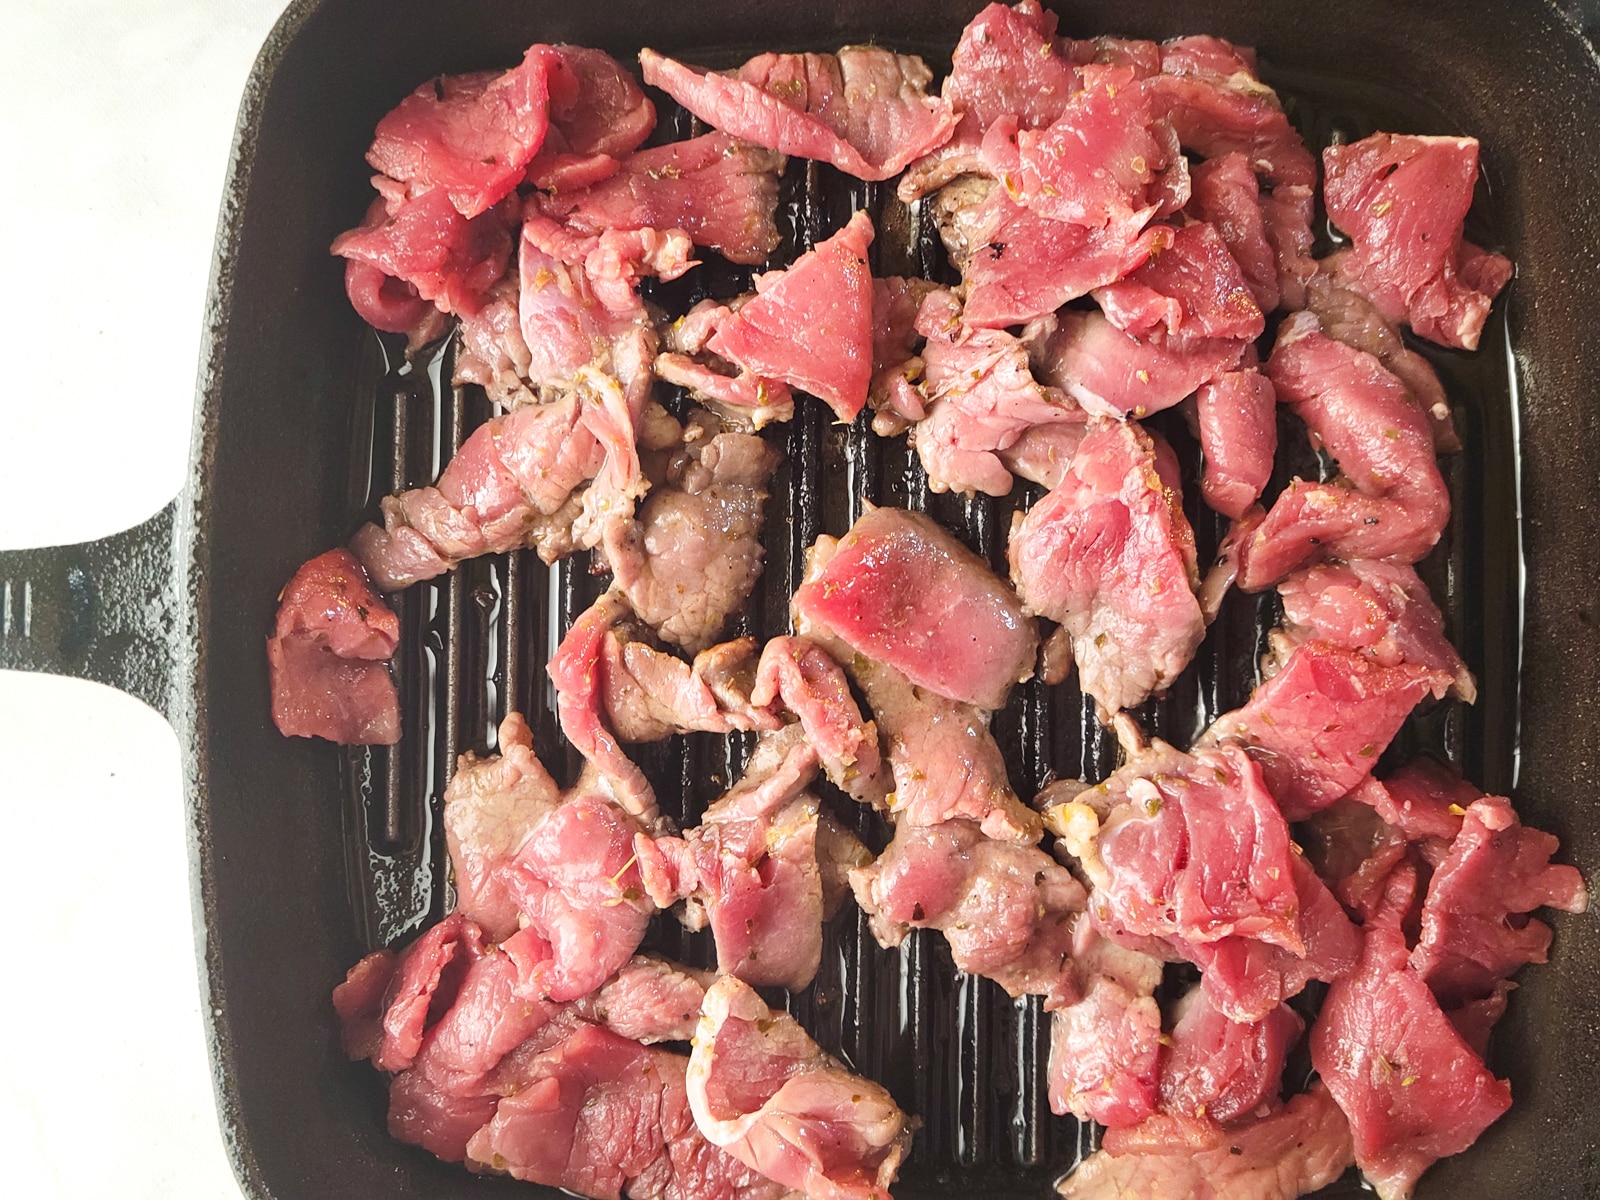 Pieces of steak cooking in a cast iron skillet.